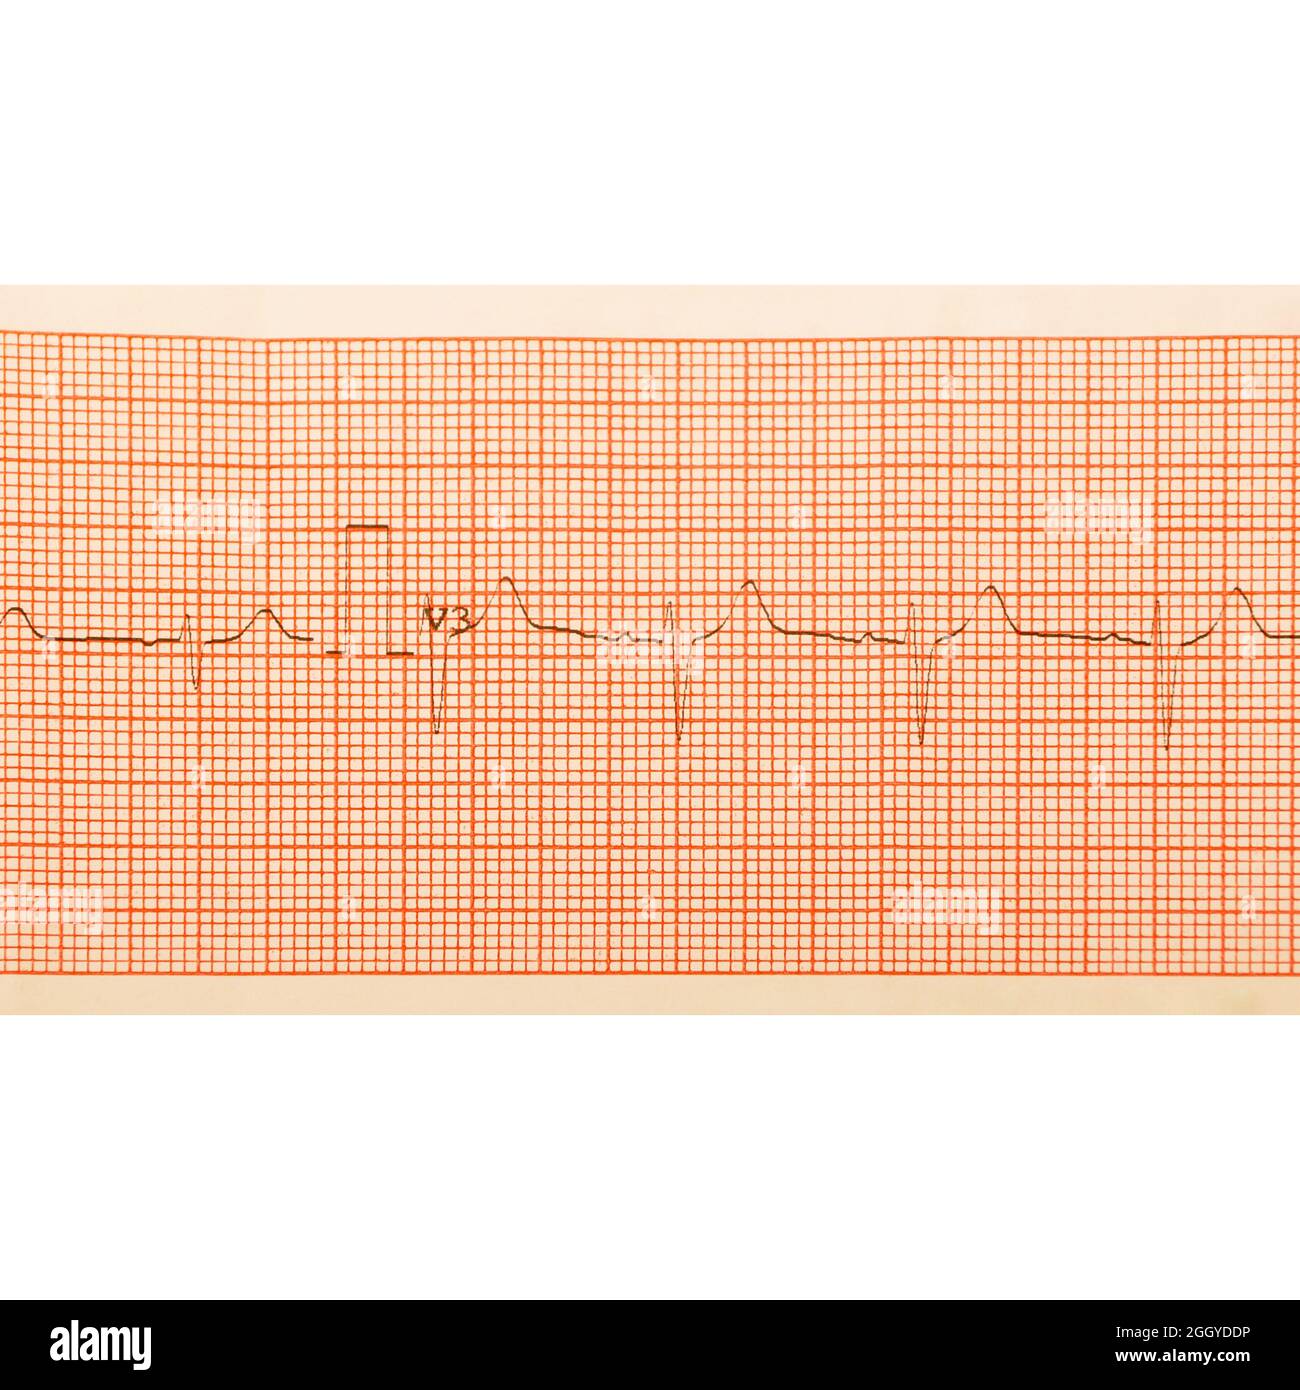 ECG test results on millimeter paper, heart rhythm results, close up of ECG Graph details Stock Photo